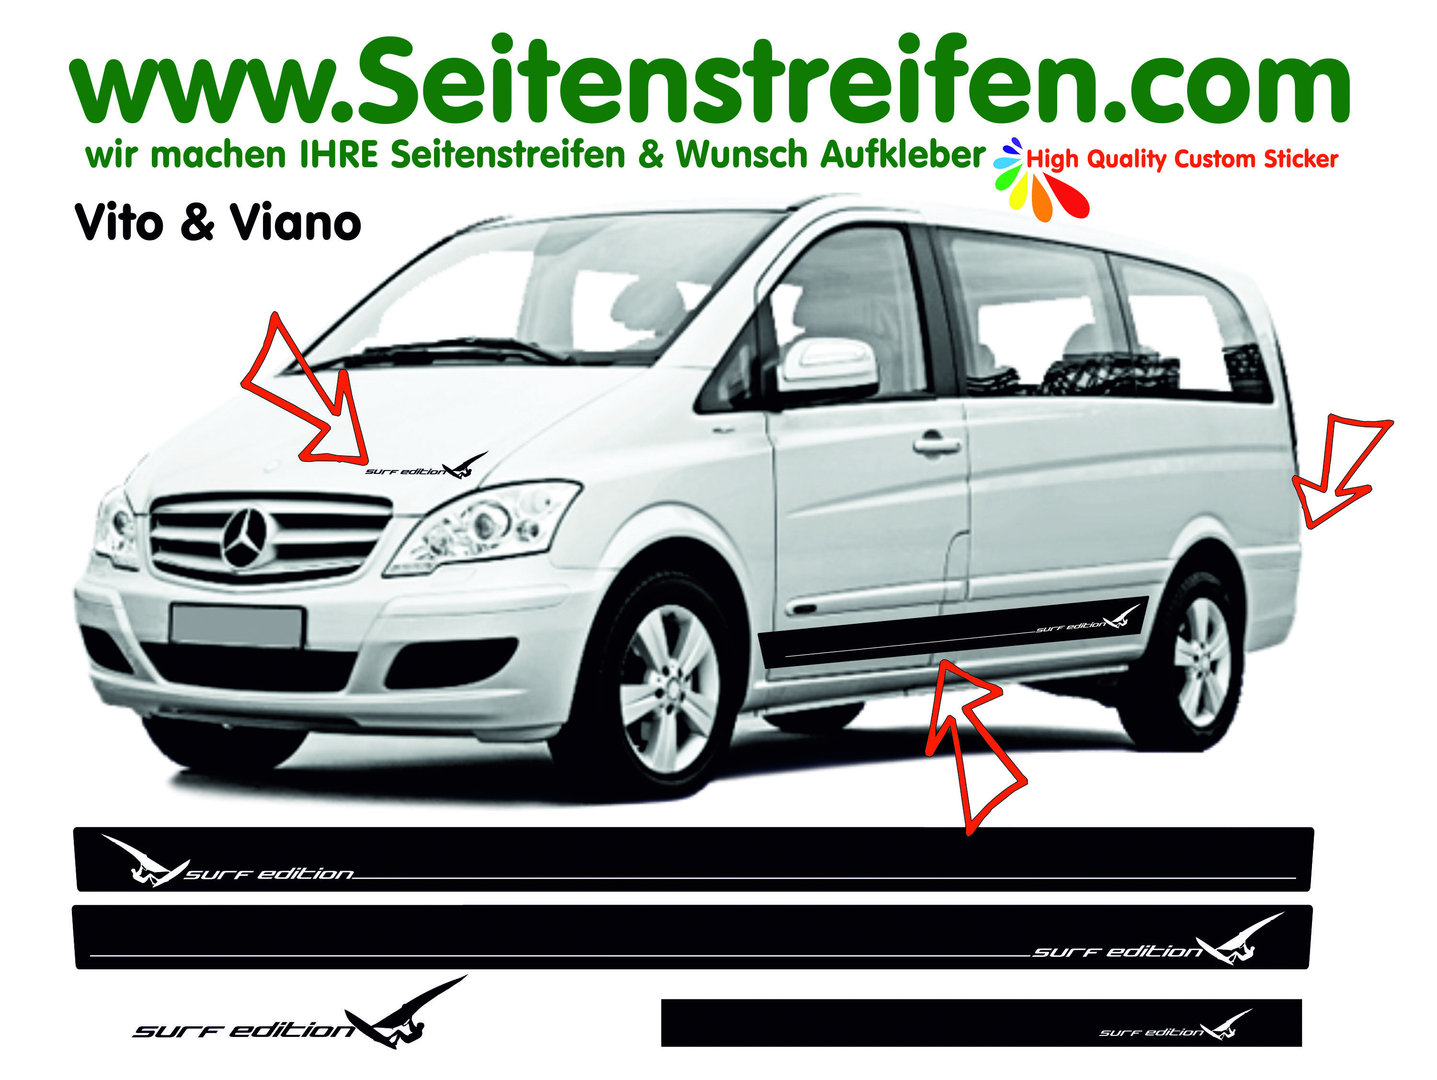 Mercedes Benz Vito & Viano - Surf Edition - Side Stripes Graphics Decals Sticker Kit - N° 7674